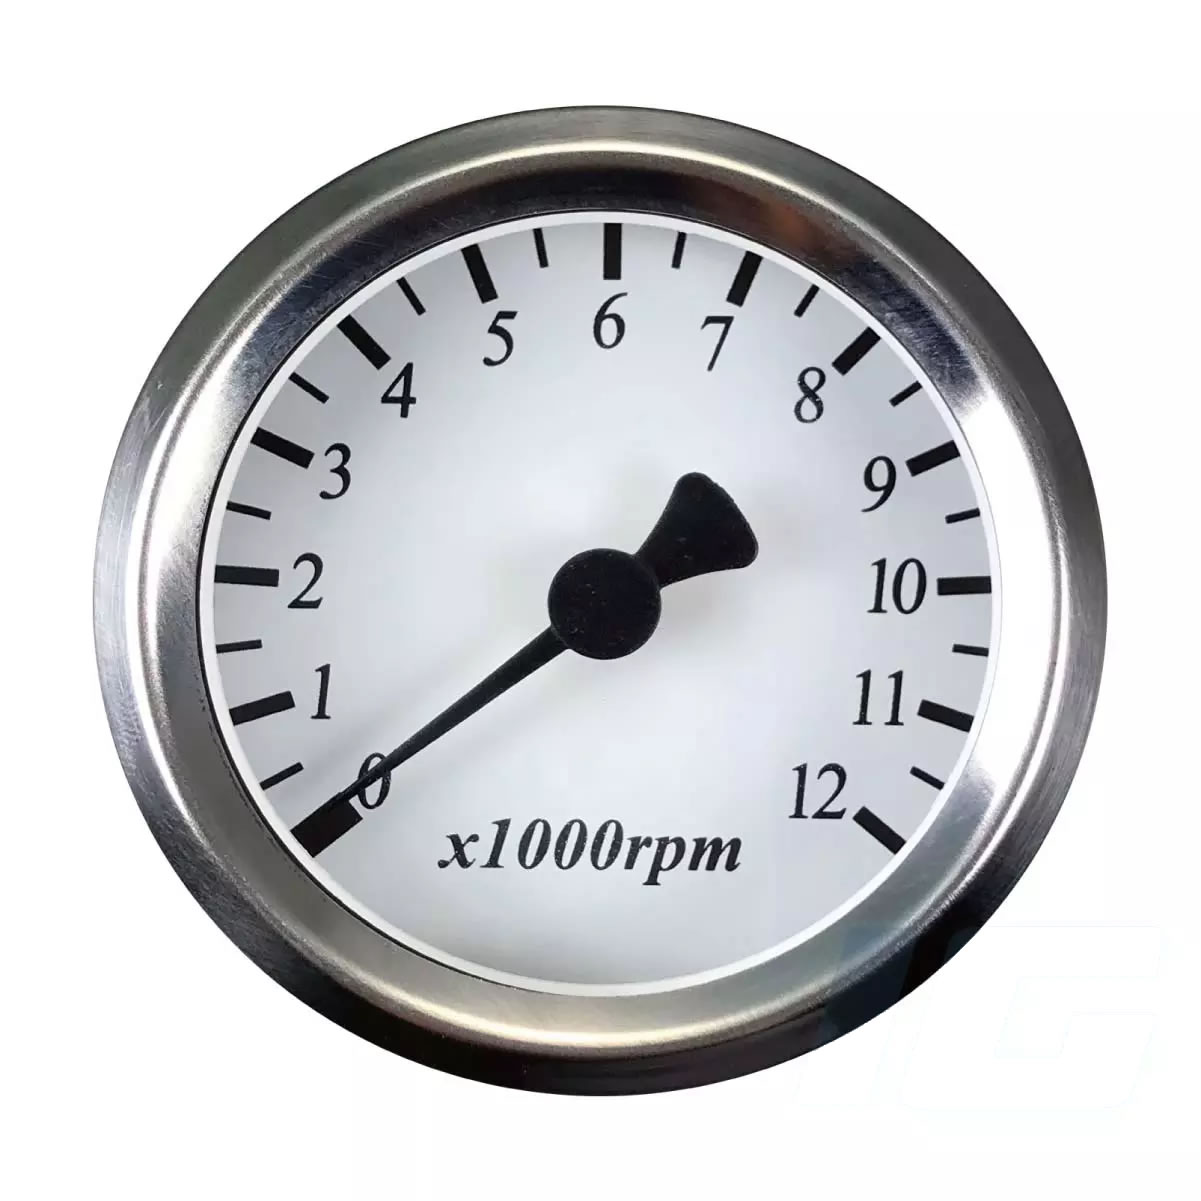 48mm White Face Universal Aftermarket Gauge - Tachometer For Motorcycle